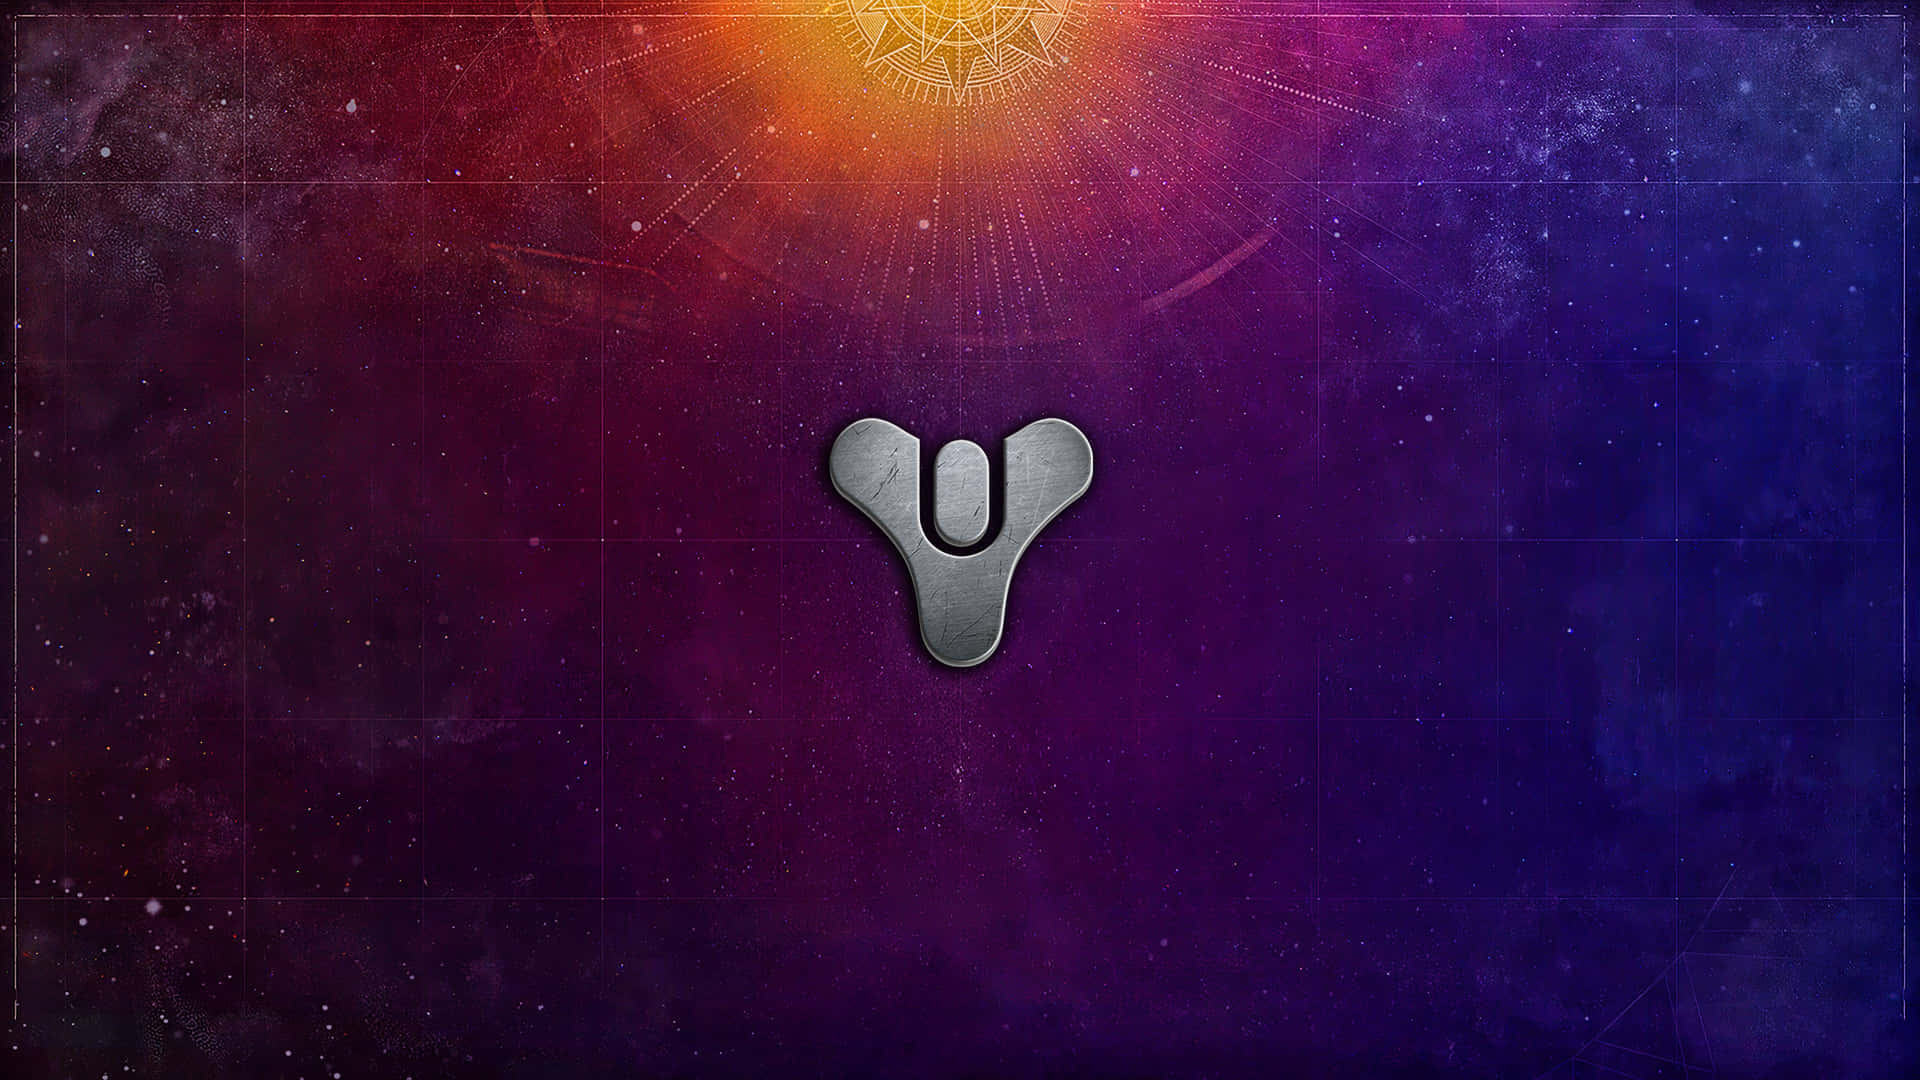 The Logo of the Video Game Destiny Wallpaper